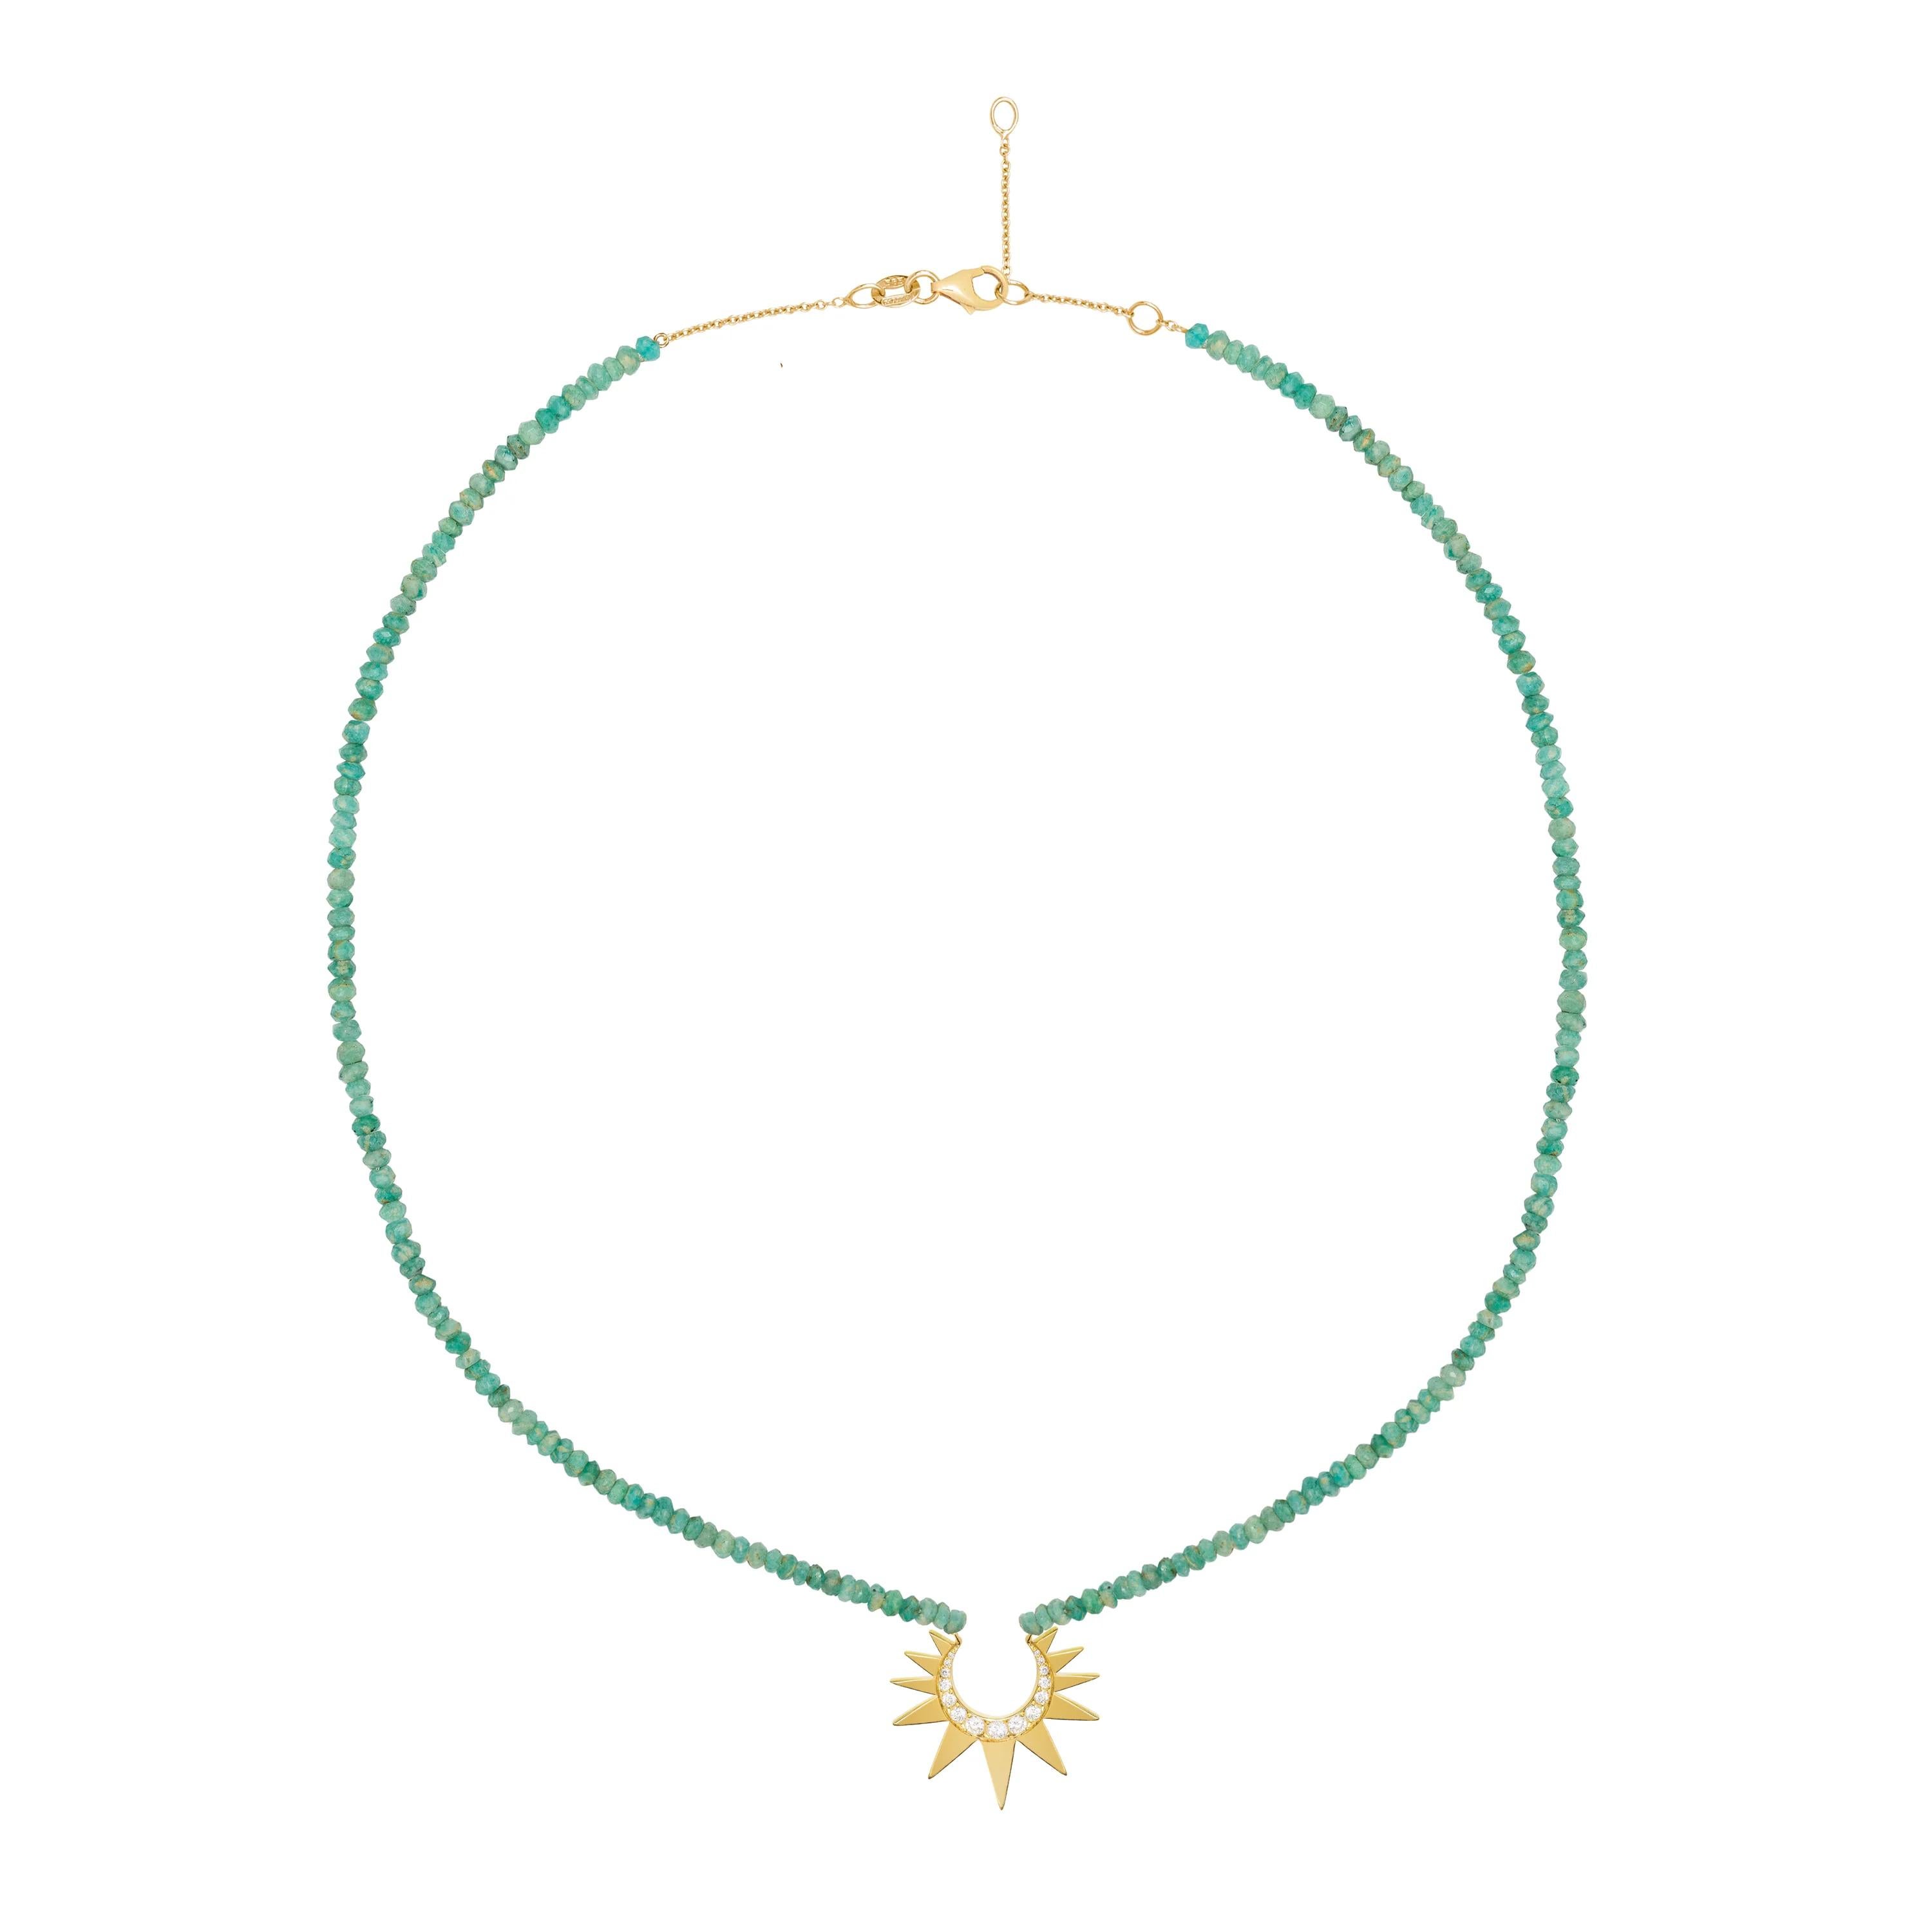 Elevated new hippie collection with semi precious stones. 

14k yellow gold small crescent with diamonds sun with diamonds on amazonite beads. 